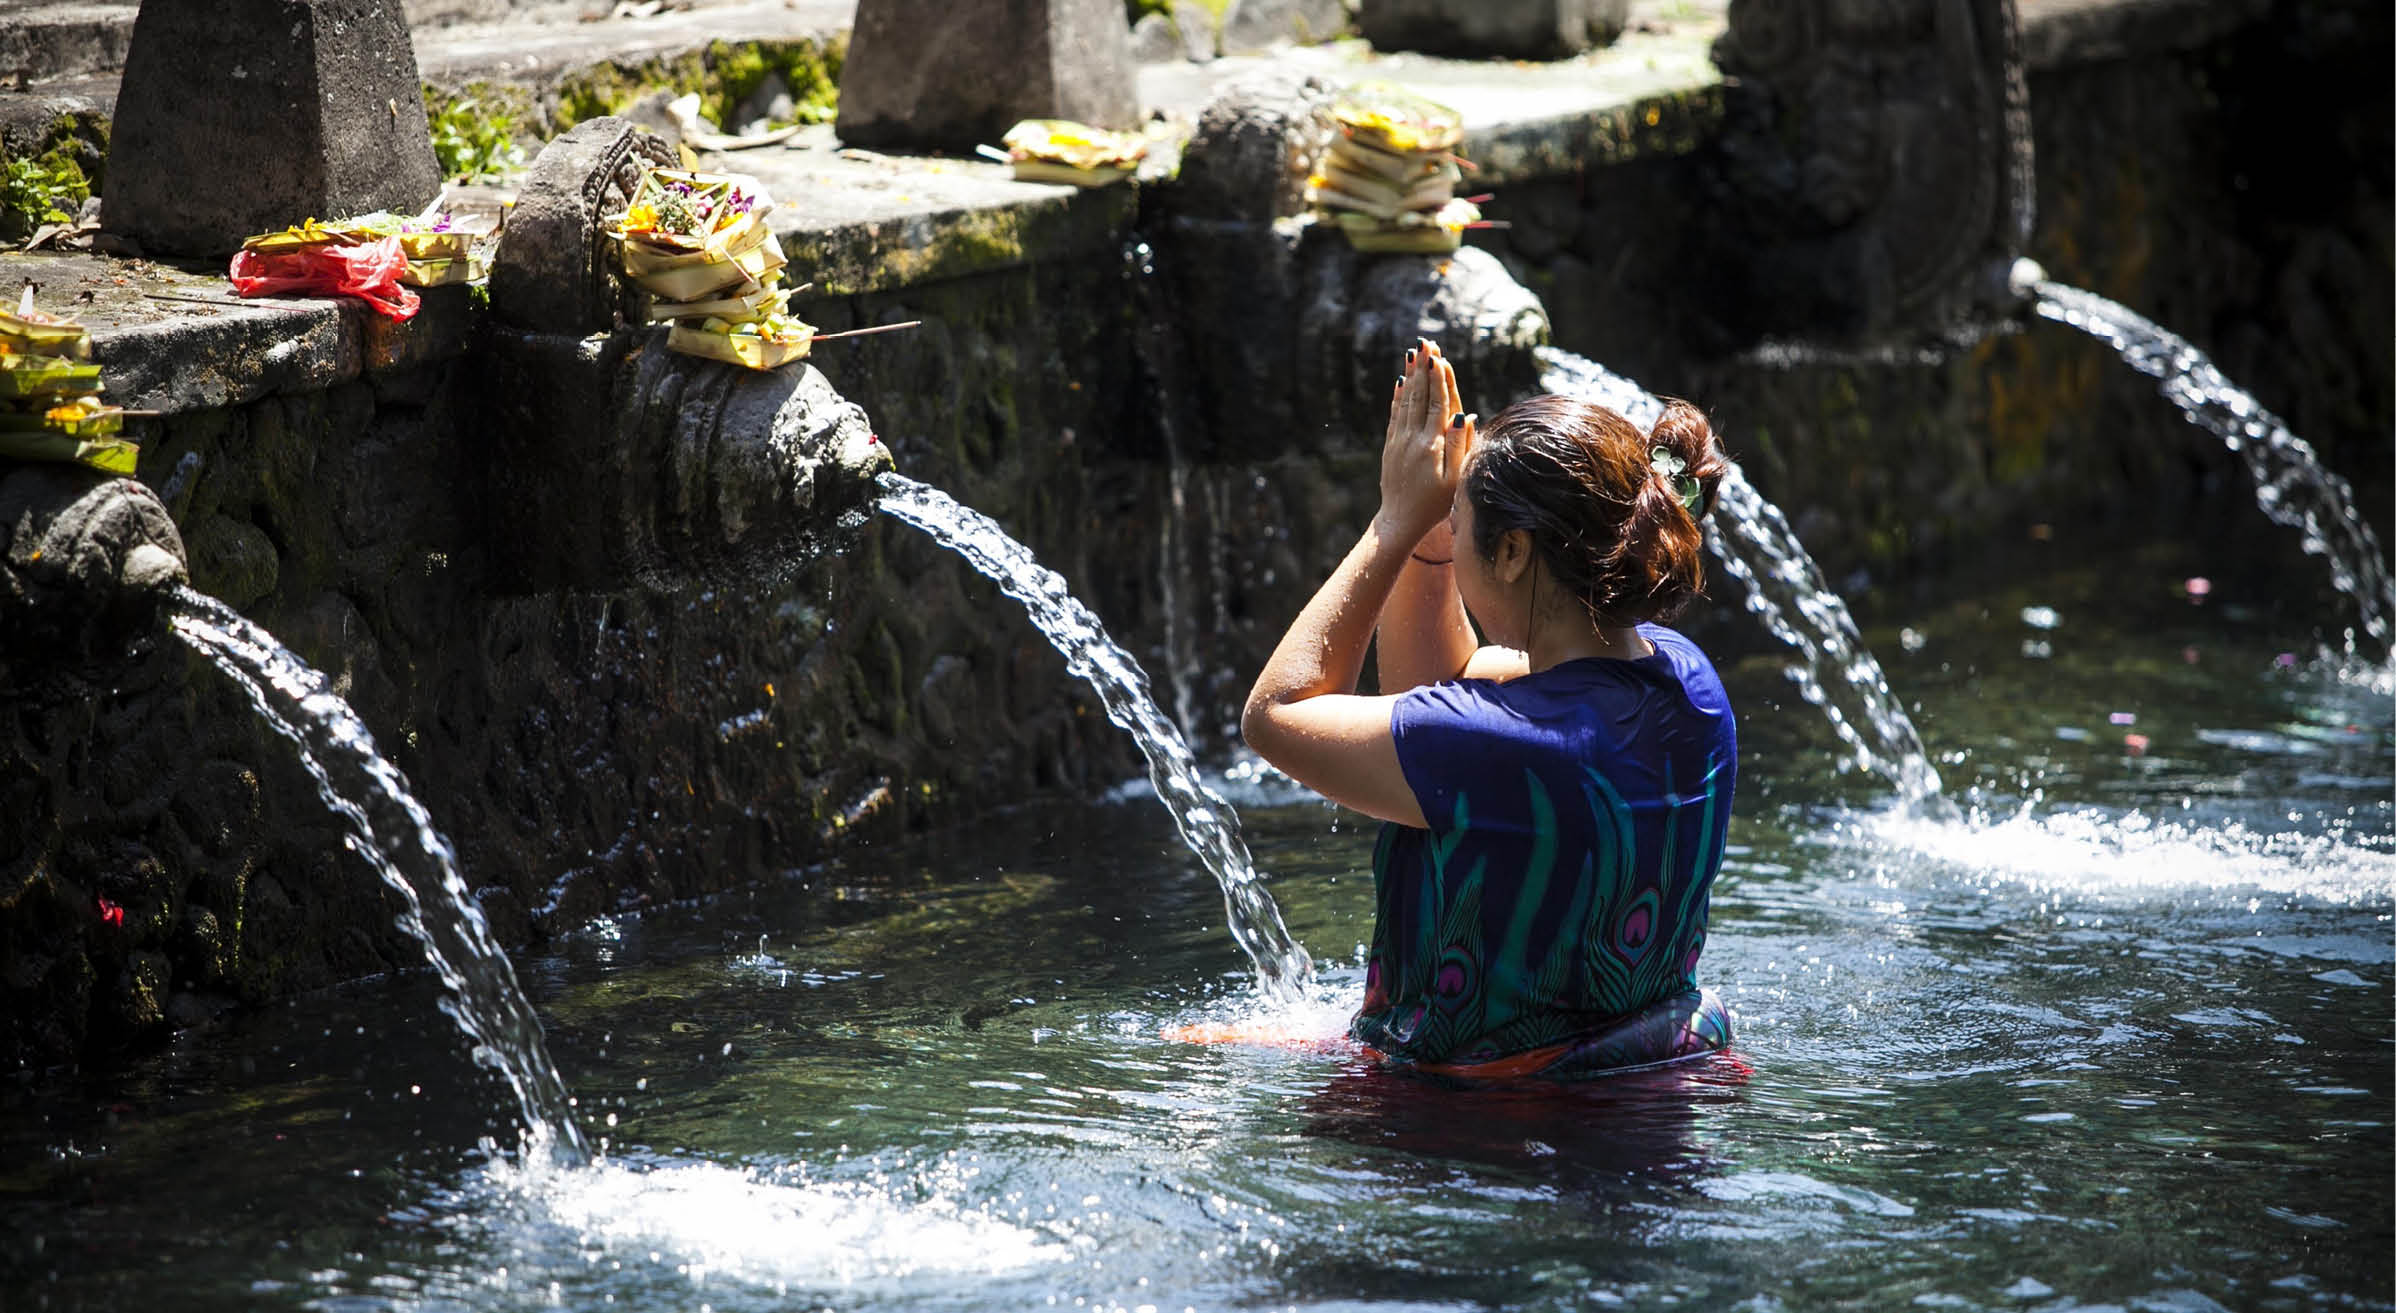 Tirta Empul Temple is a Hindu temple in the middle of Bali Island, Indonesia, famous for its holy water where Hindu Bali people go for purification.